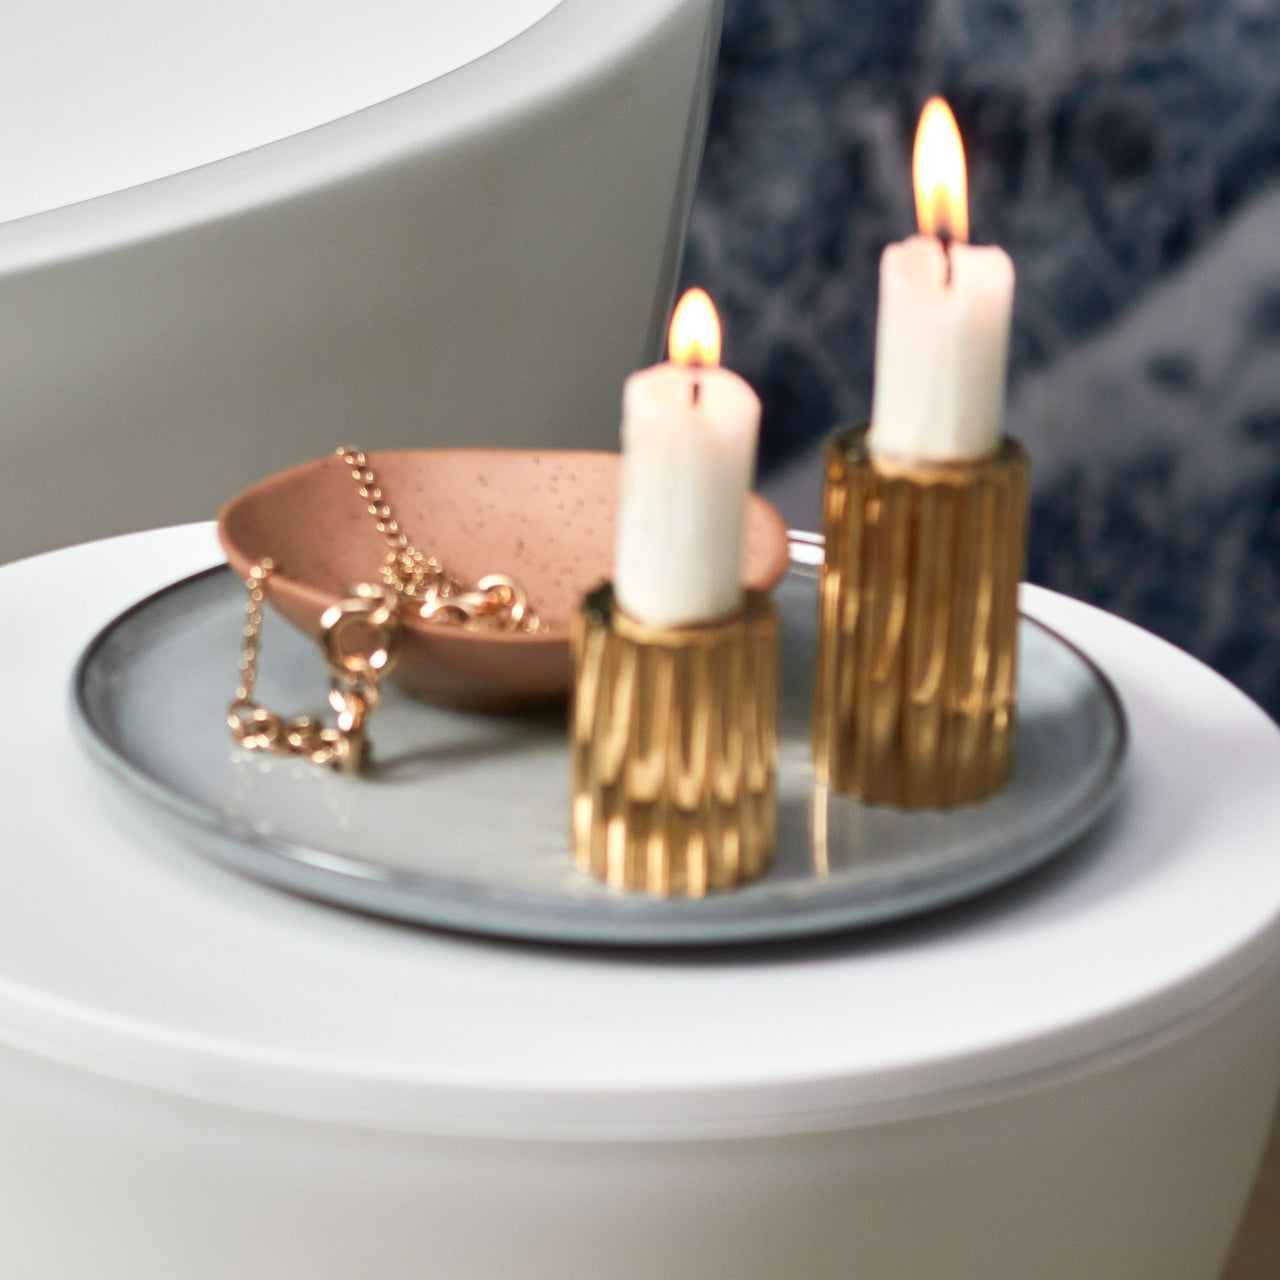 2 Piece Ribb Taper Candle Holder Set